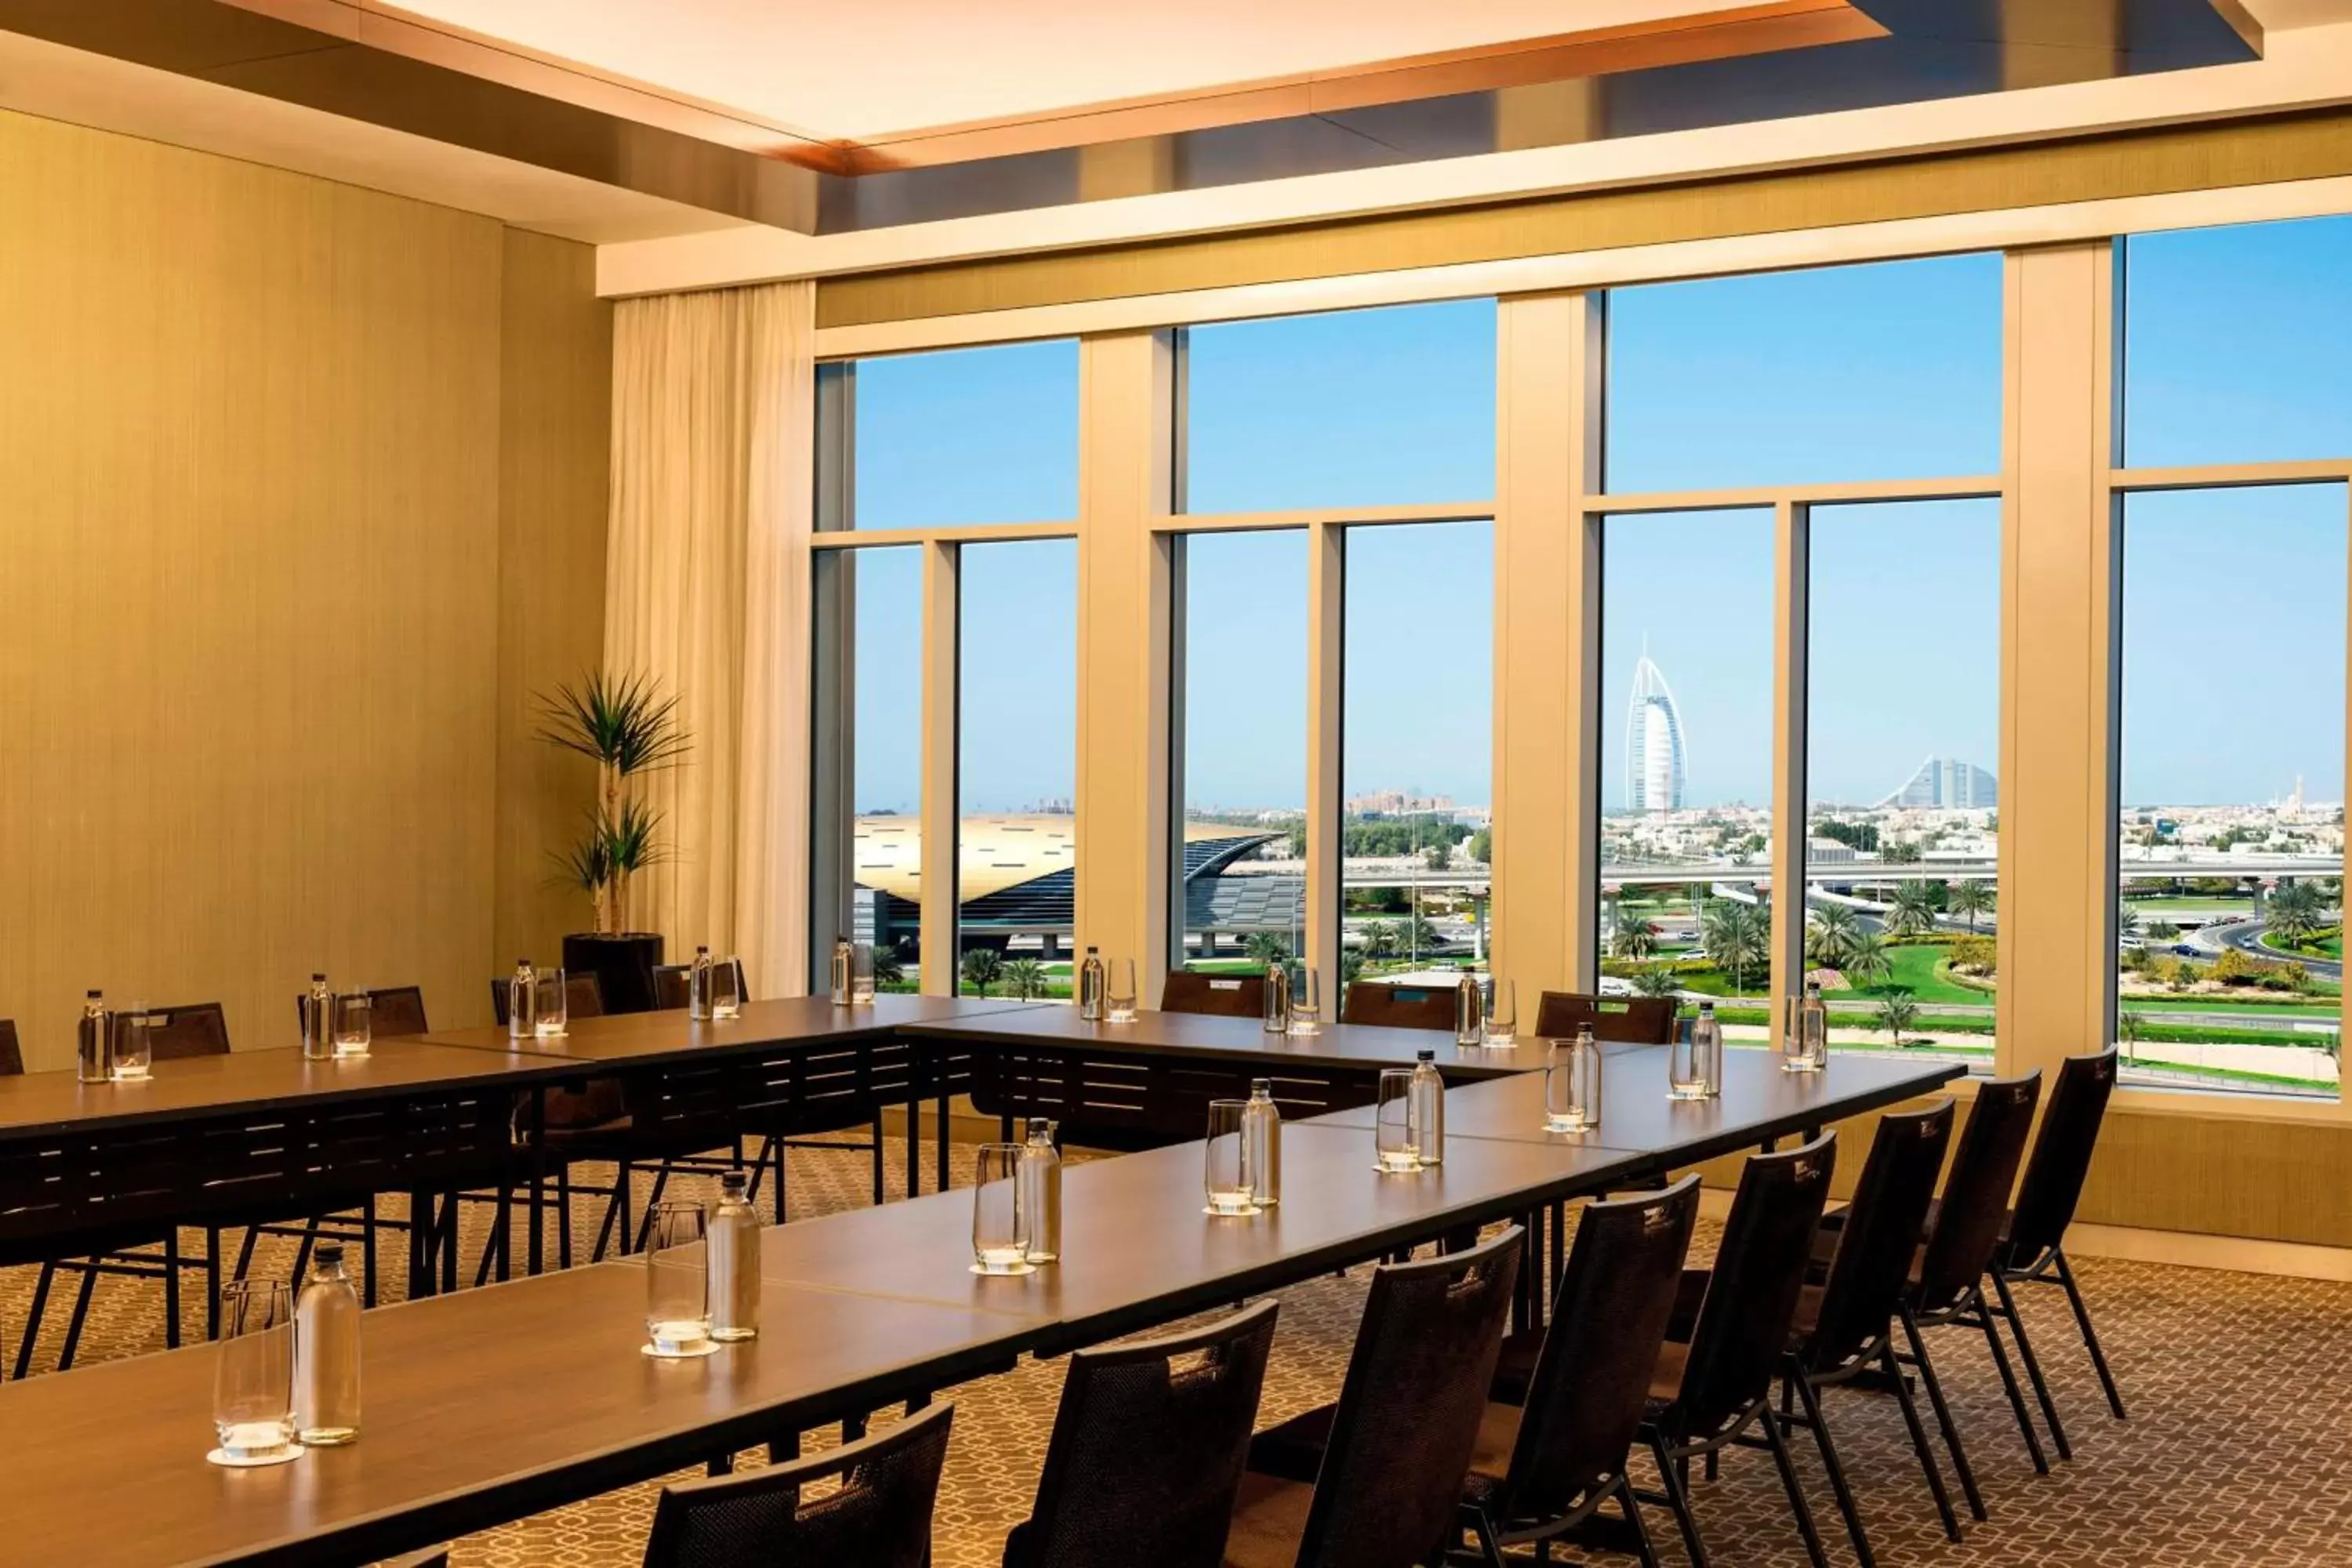 Meeting/conference room in Sheraton Mall of the Emirates Hotel, Dubai